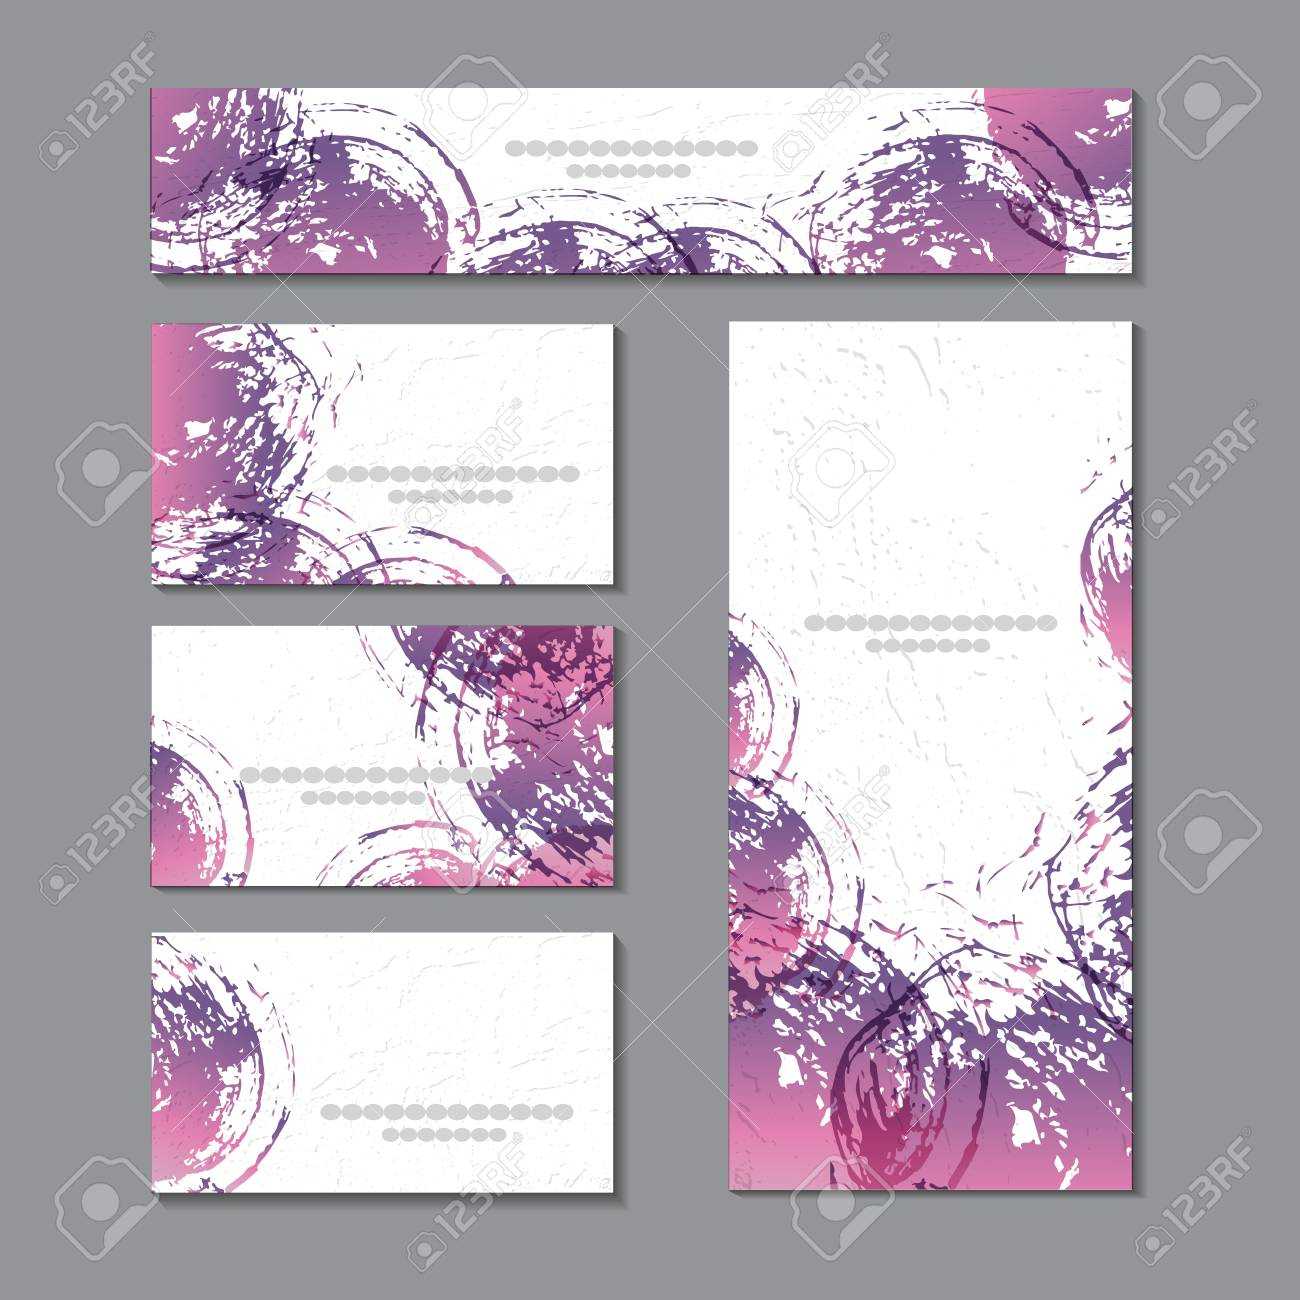 Cute Templates With Abstract Graphics.for Romance And Design,.. Throughout Advertising Cards Templates